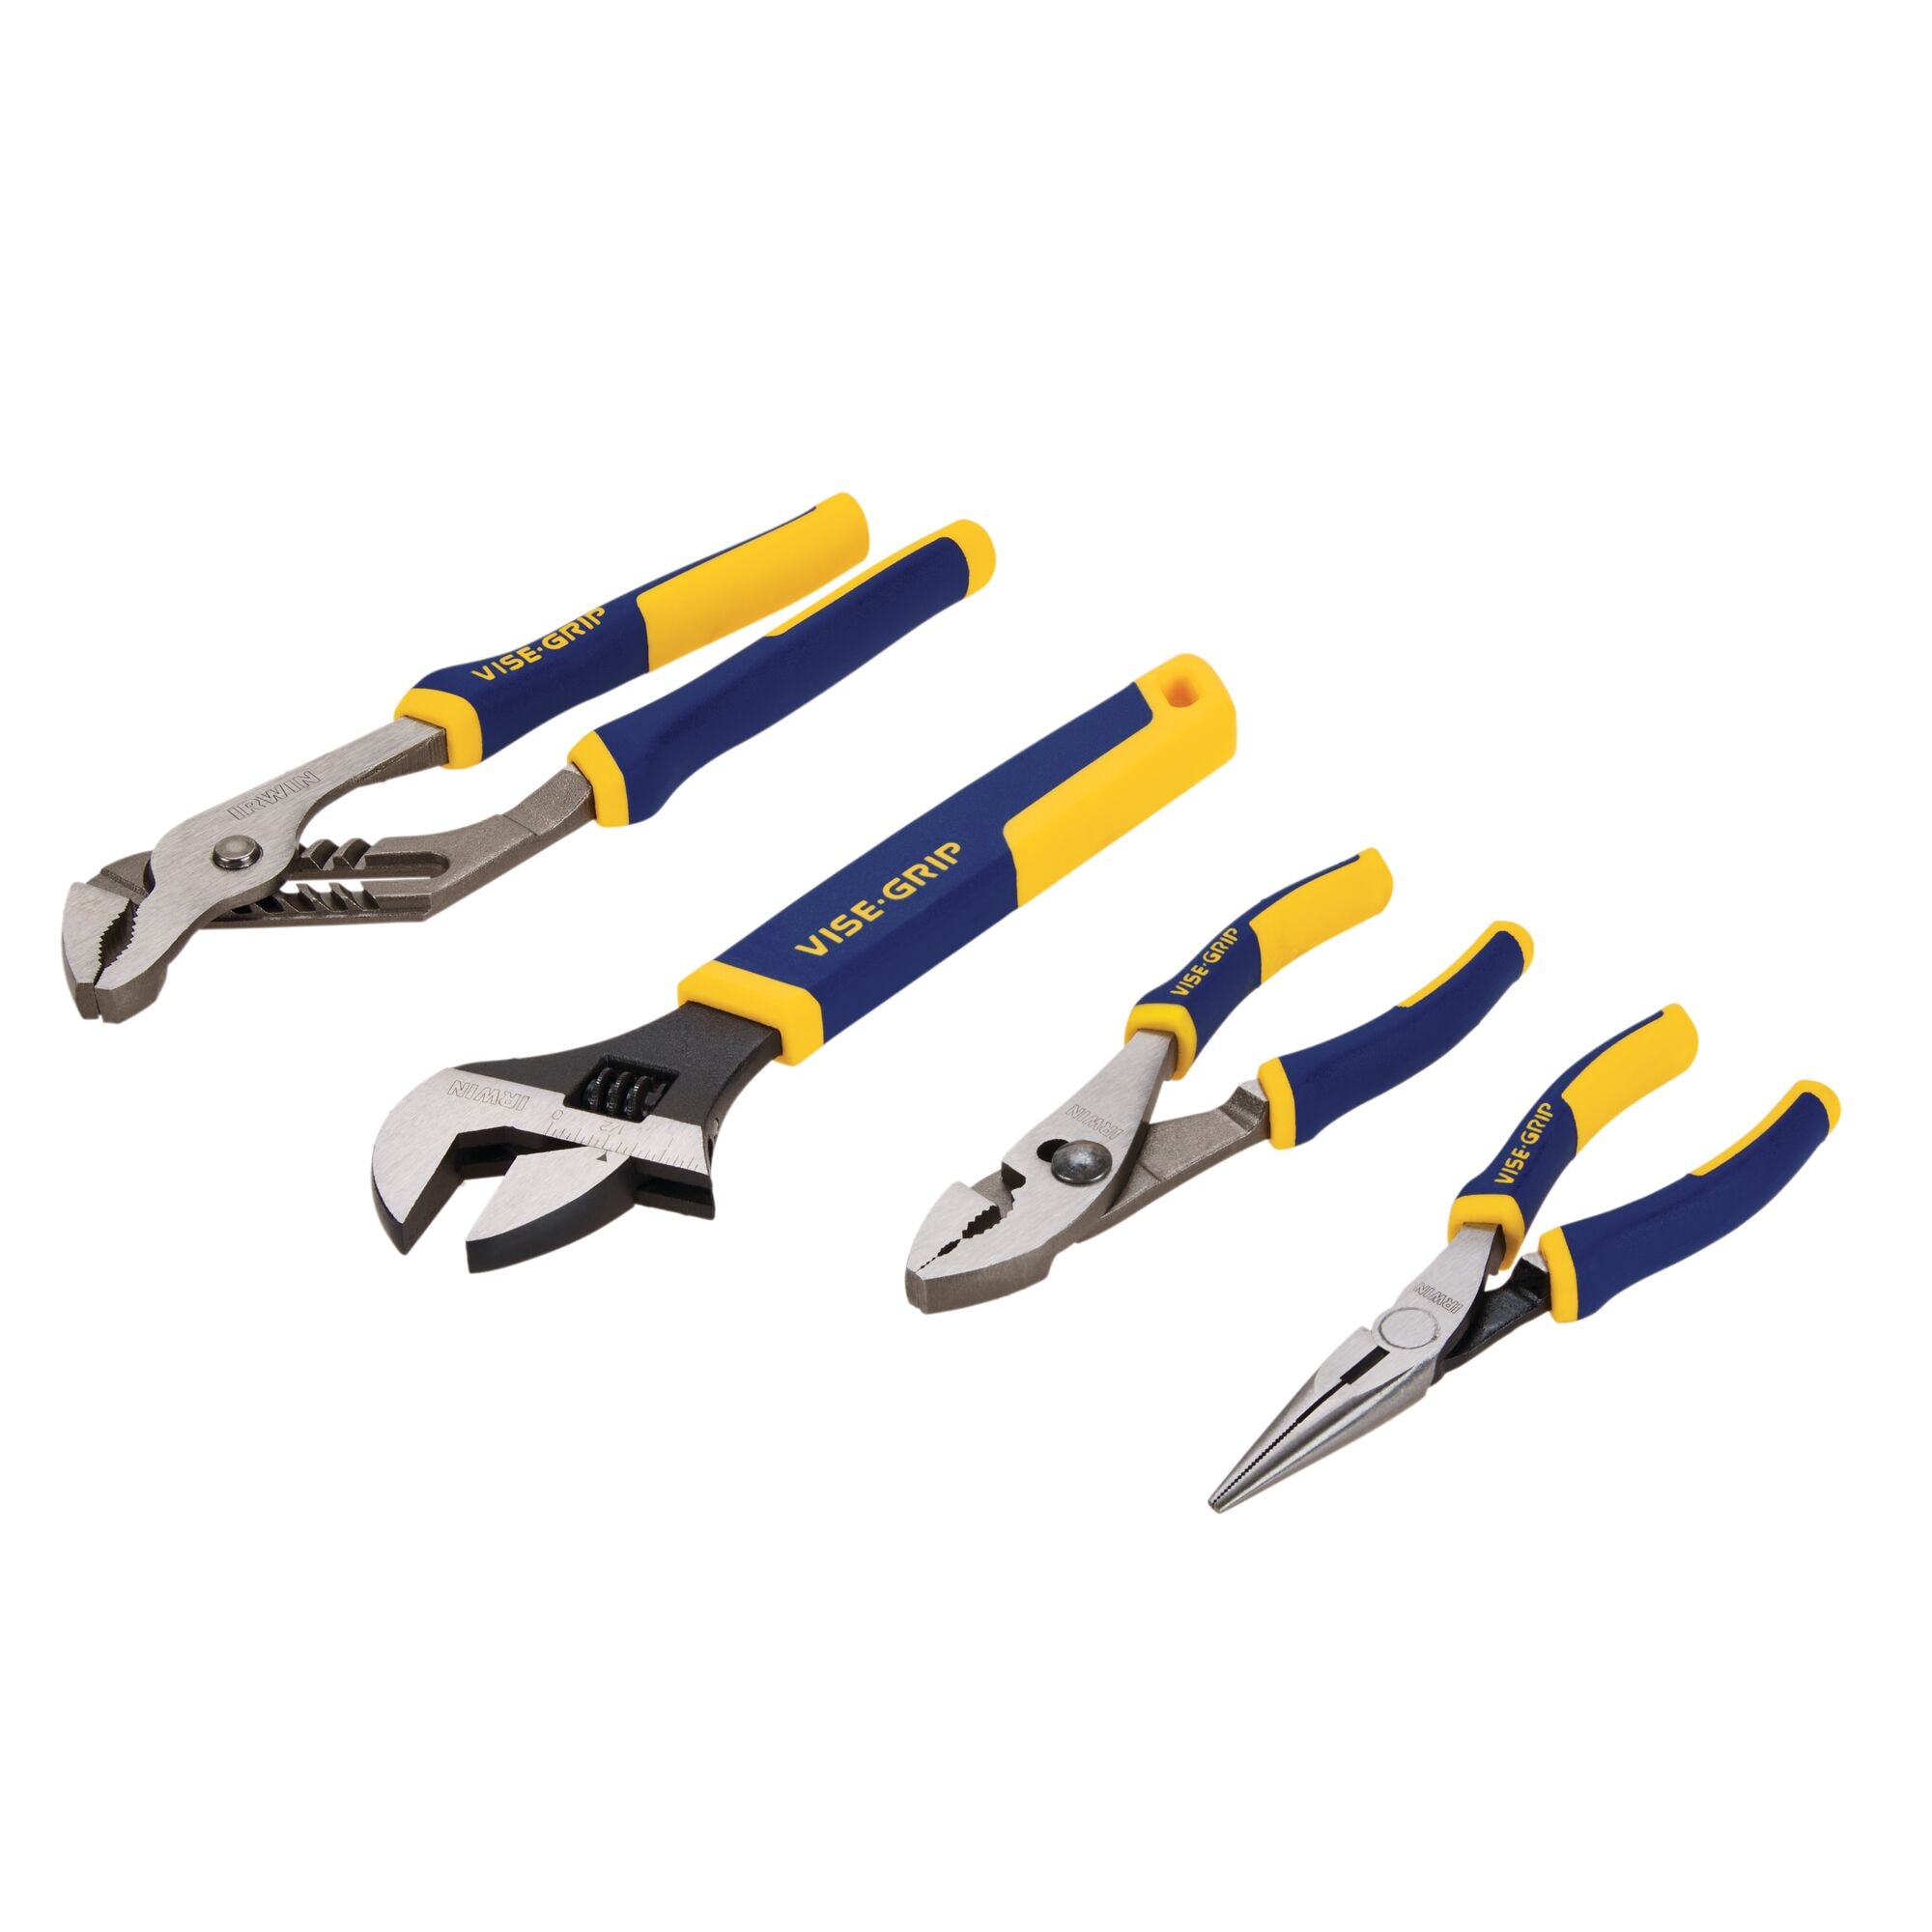 IRWIN VISE-GRIP ProPliers 4-Pack Assorted Pliers in the Plier Sets